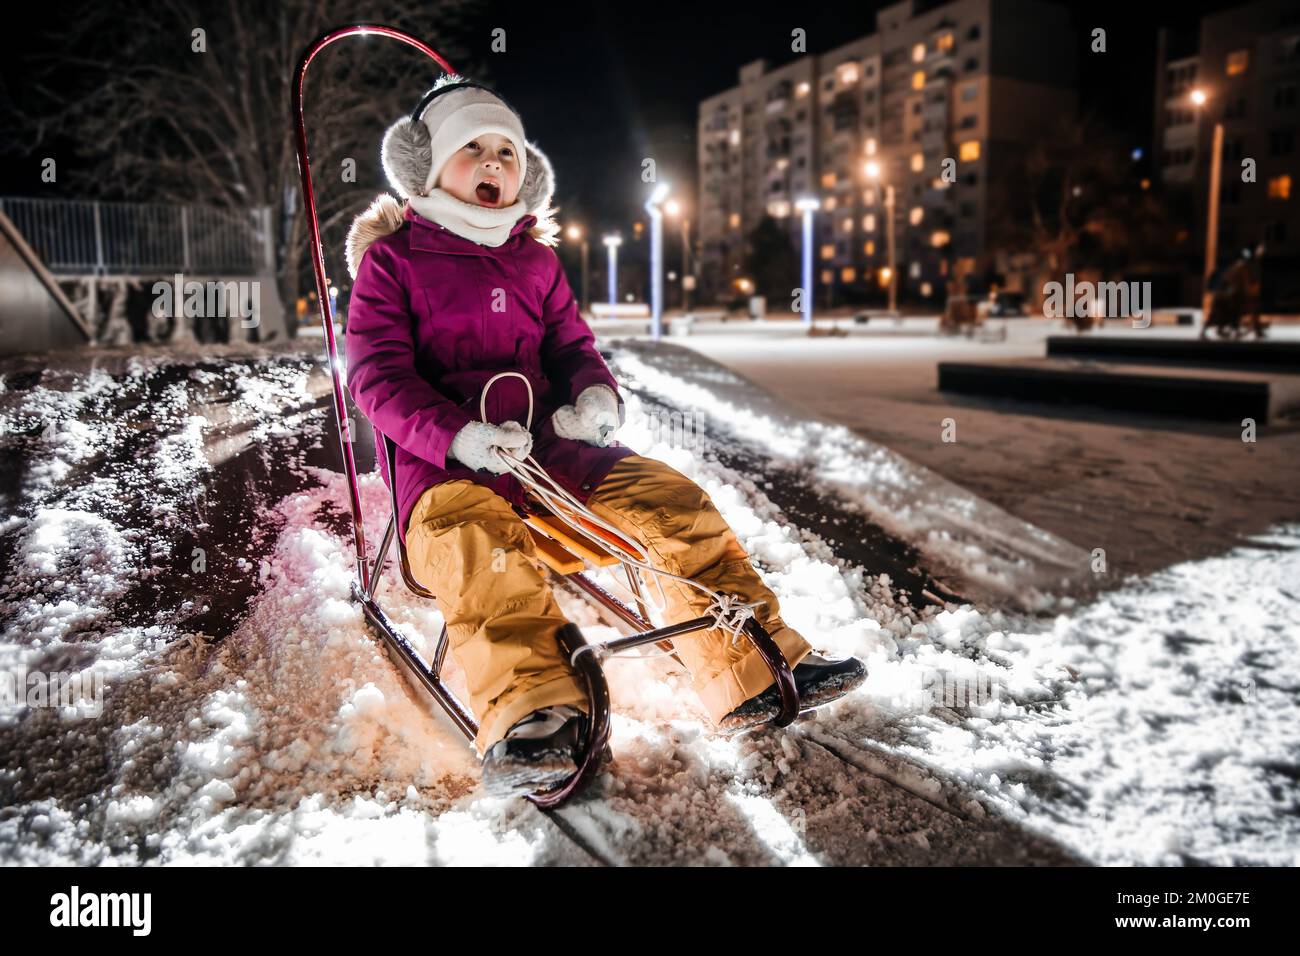 A little girl is sledding on a snowy winter evening. Stock Photo